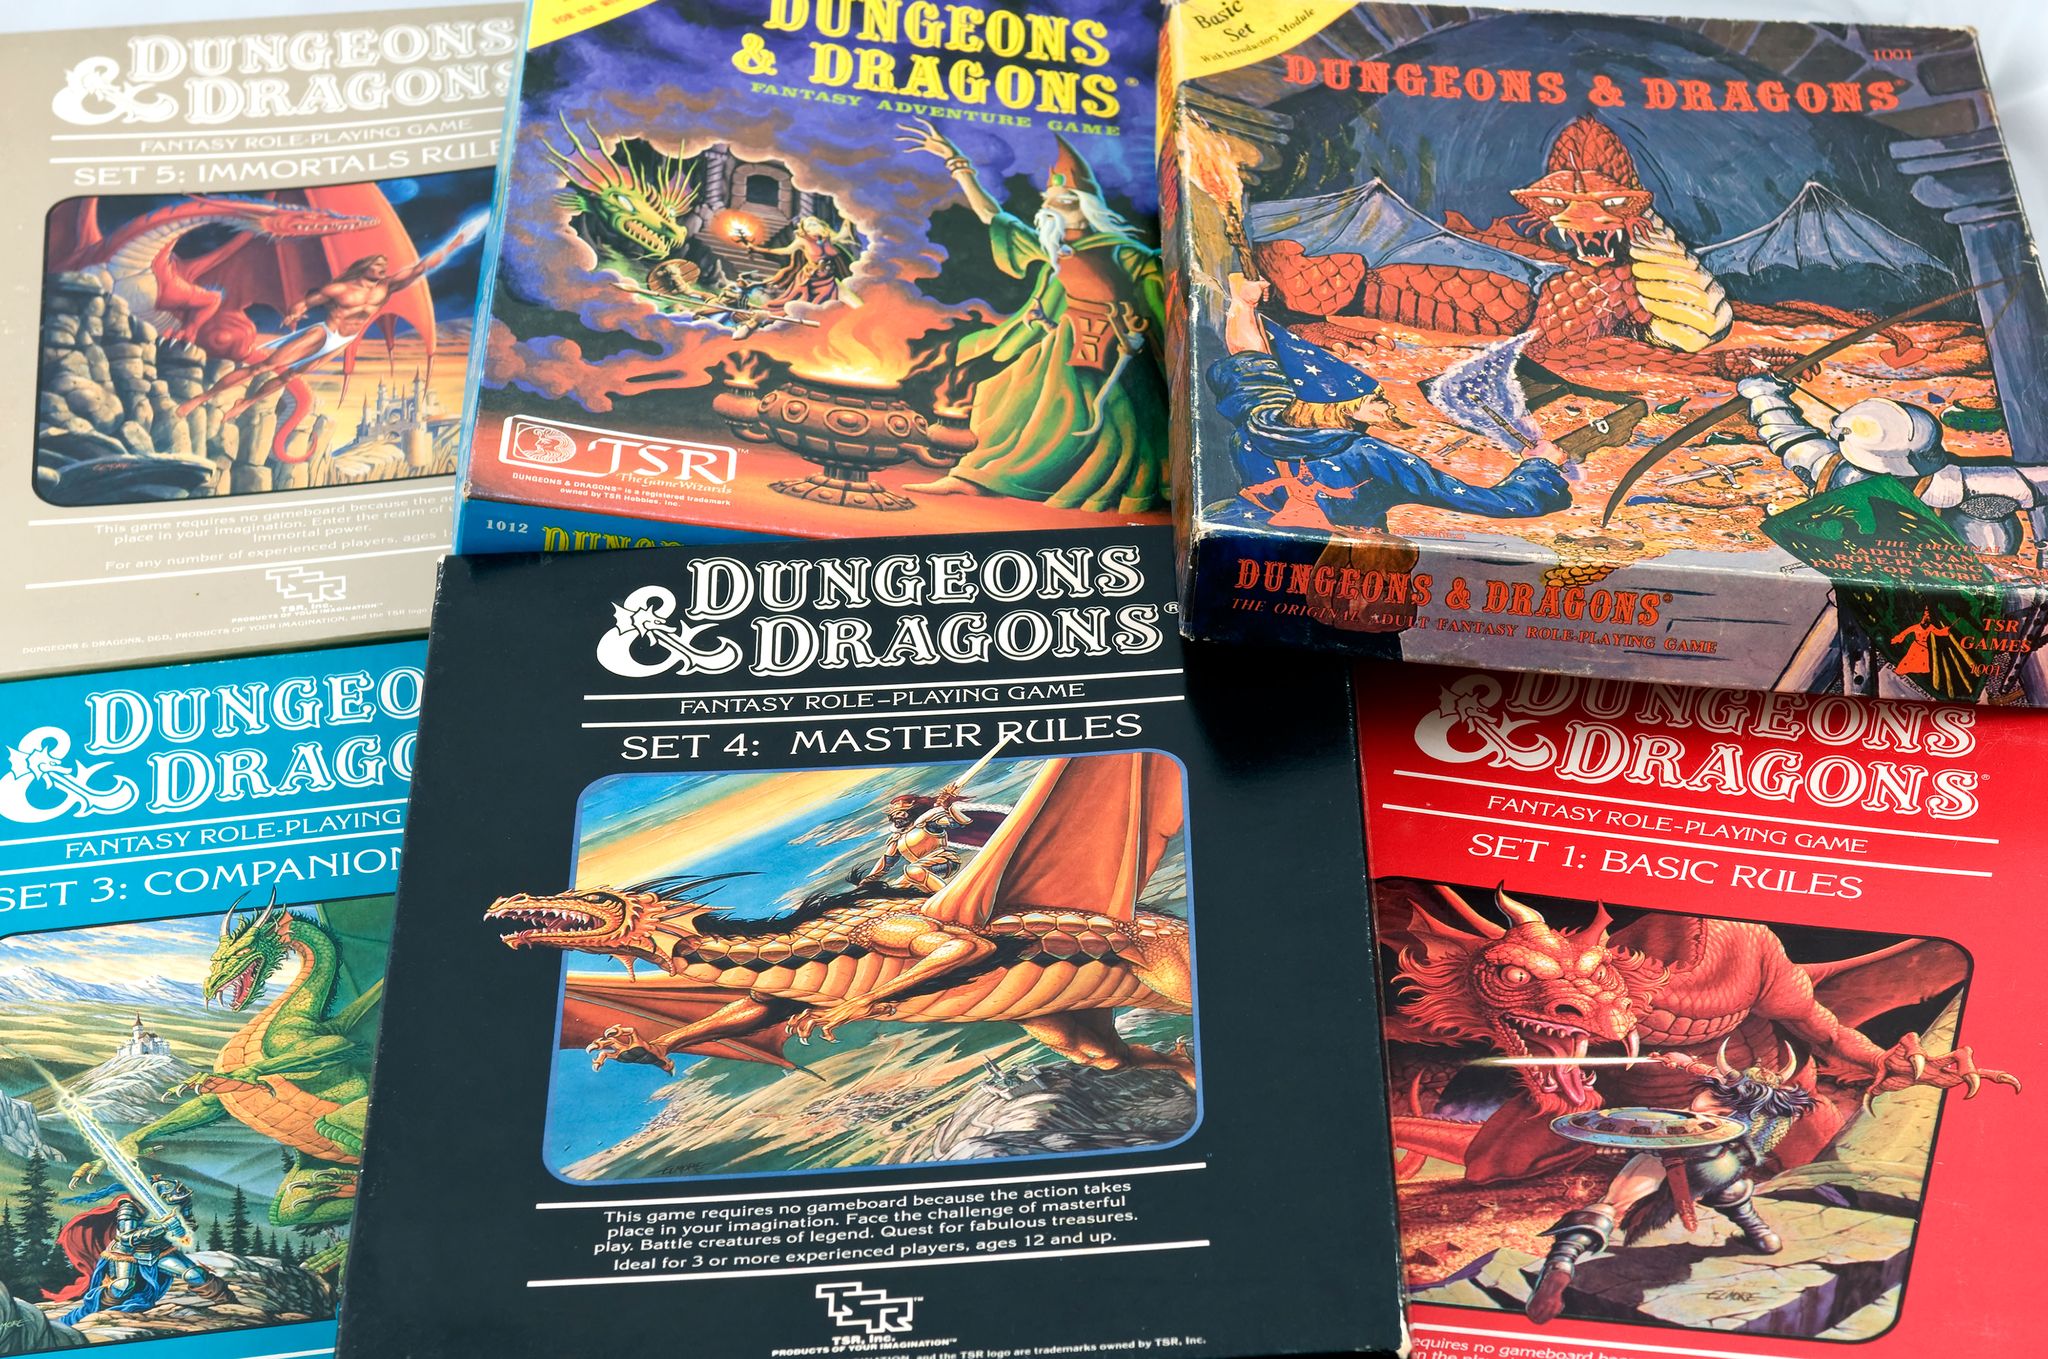 Why Dungeons & Dragons Isn't Just for Geeks (According to an